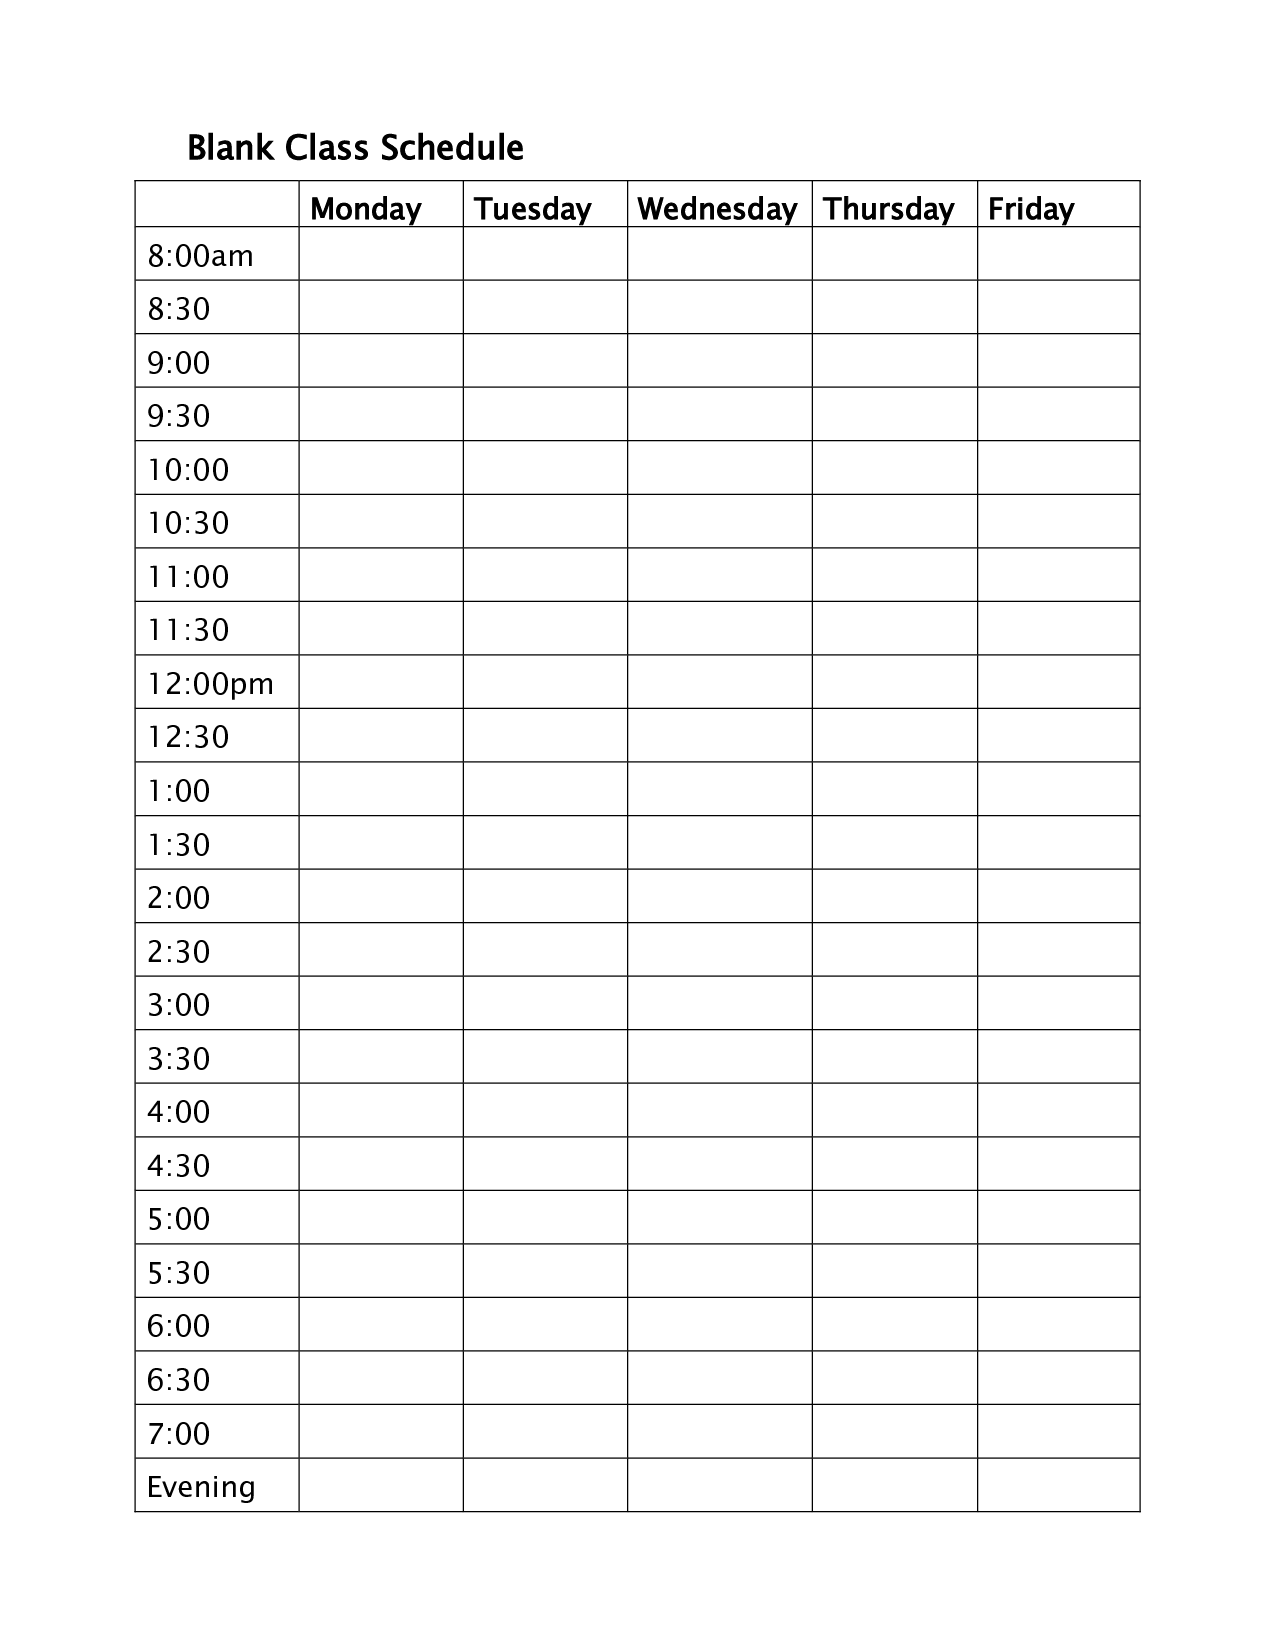 free printable daily schedule templates